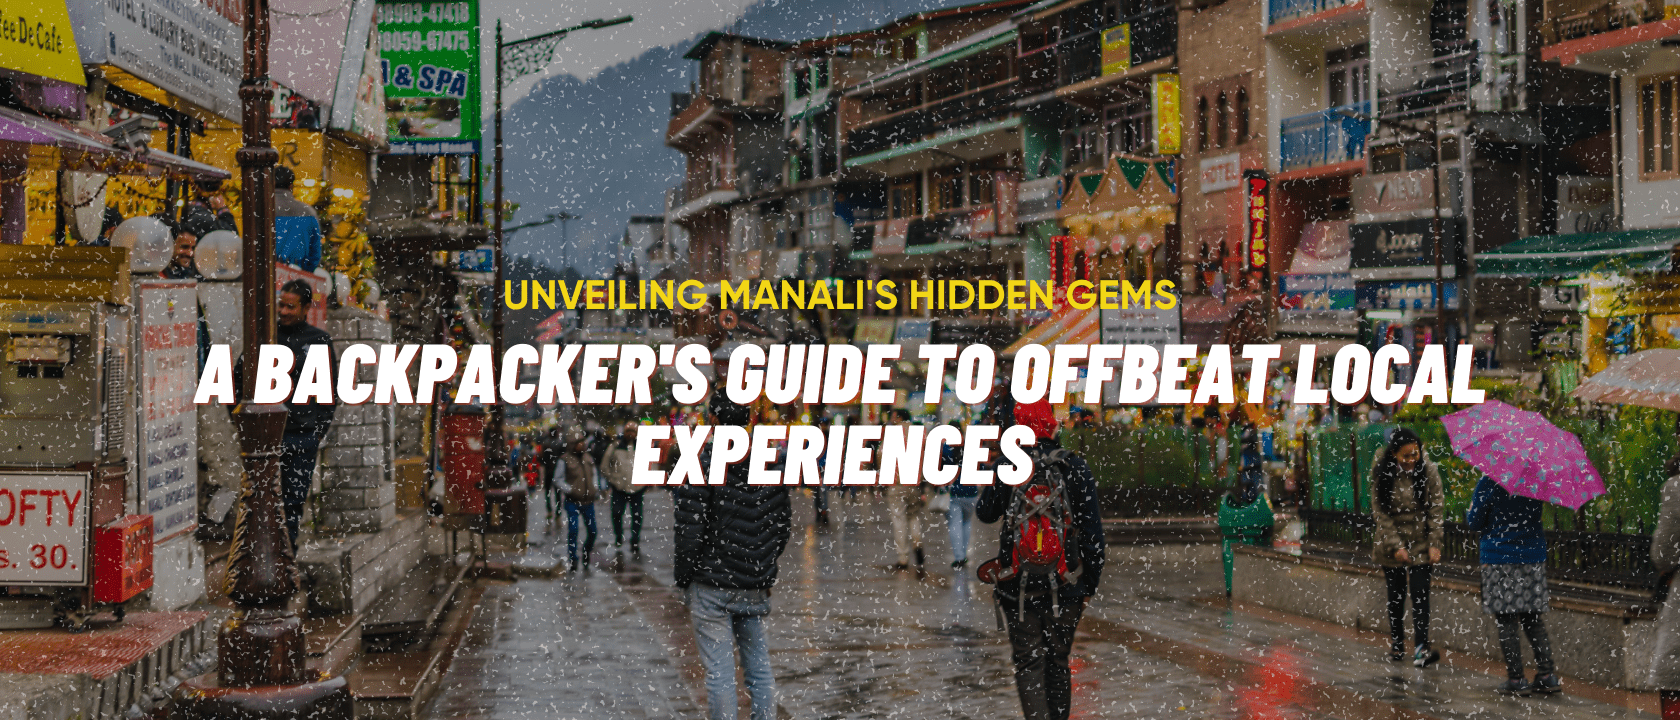 Unveiling Manali’s Hidden Gems: A Backpacker’s Guide to Offbeat Local Experiences 